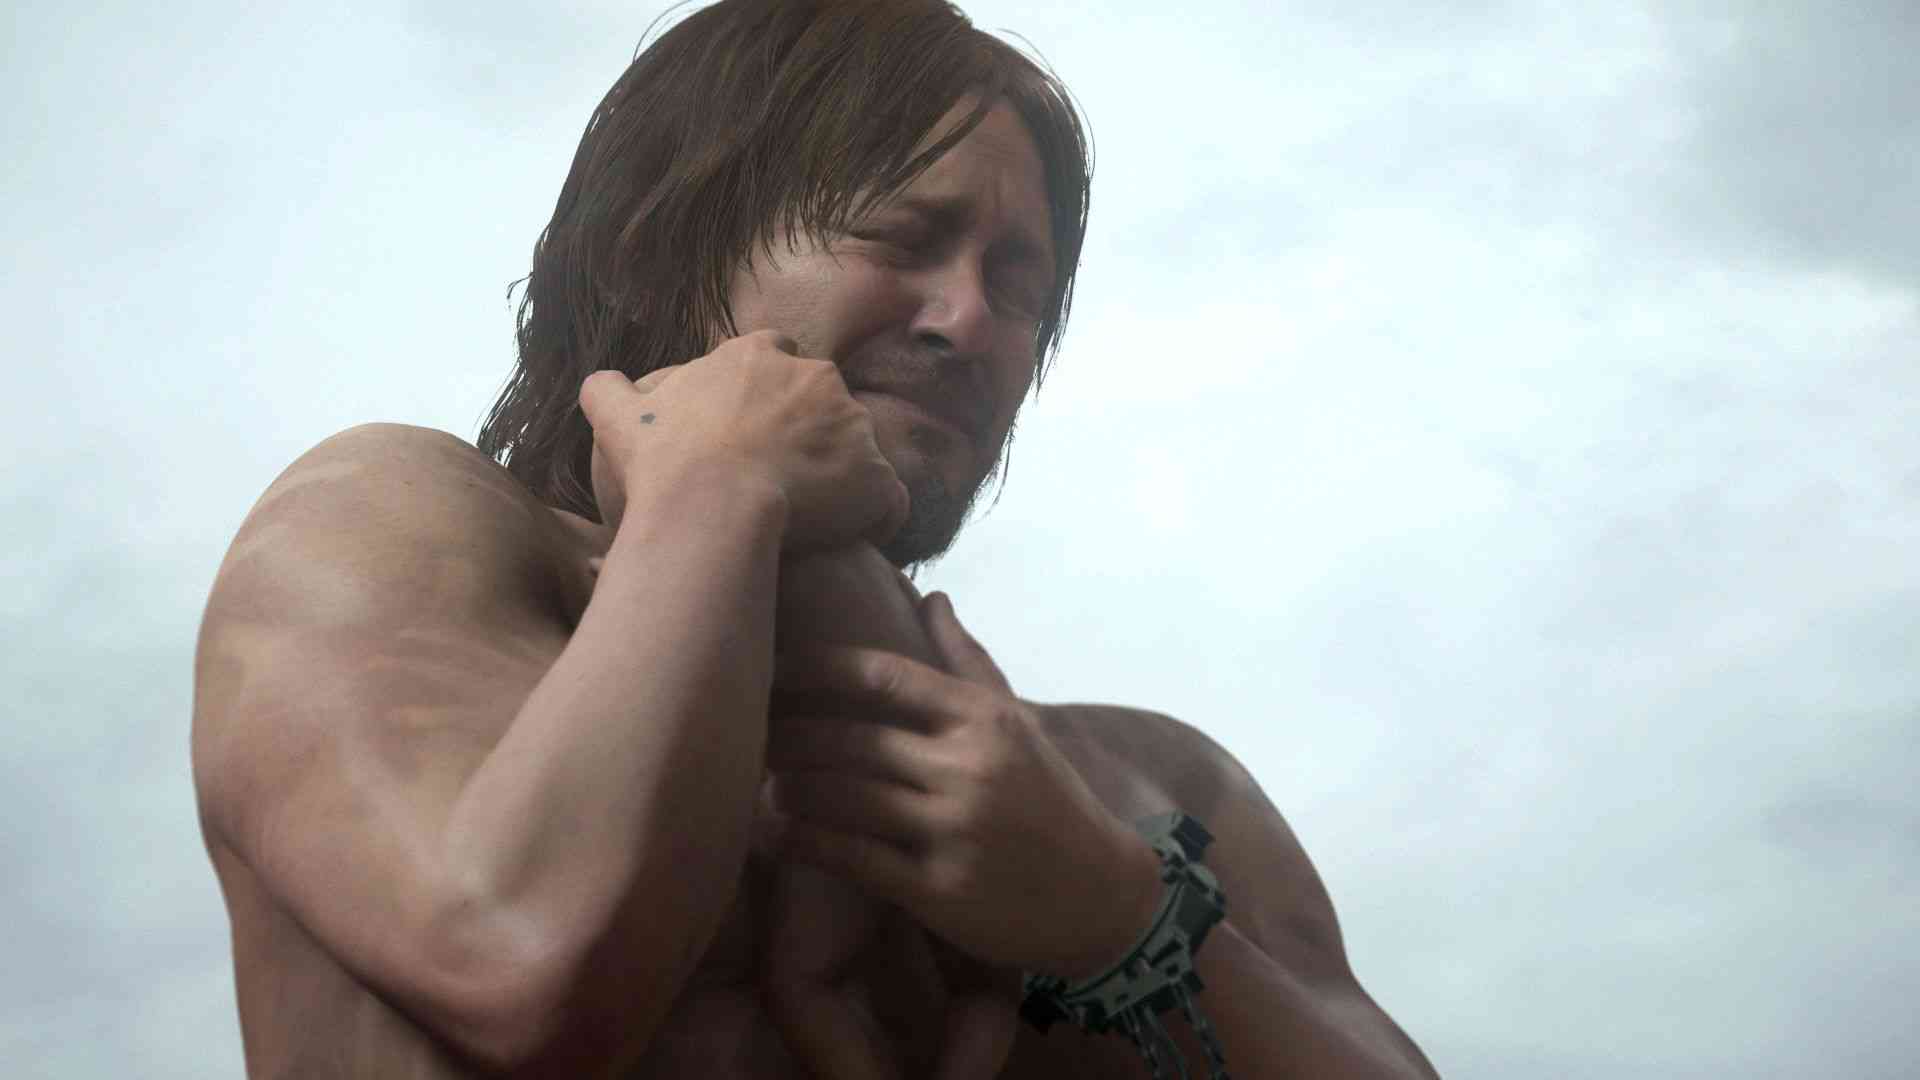 bestbuy pointed that death stranding will launch in 2019 1446 big 1